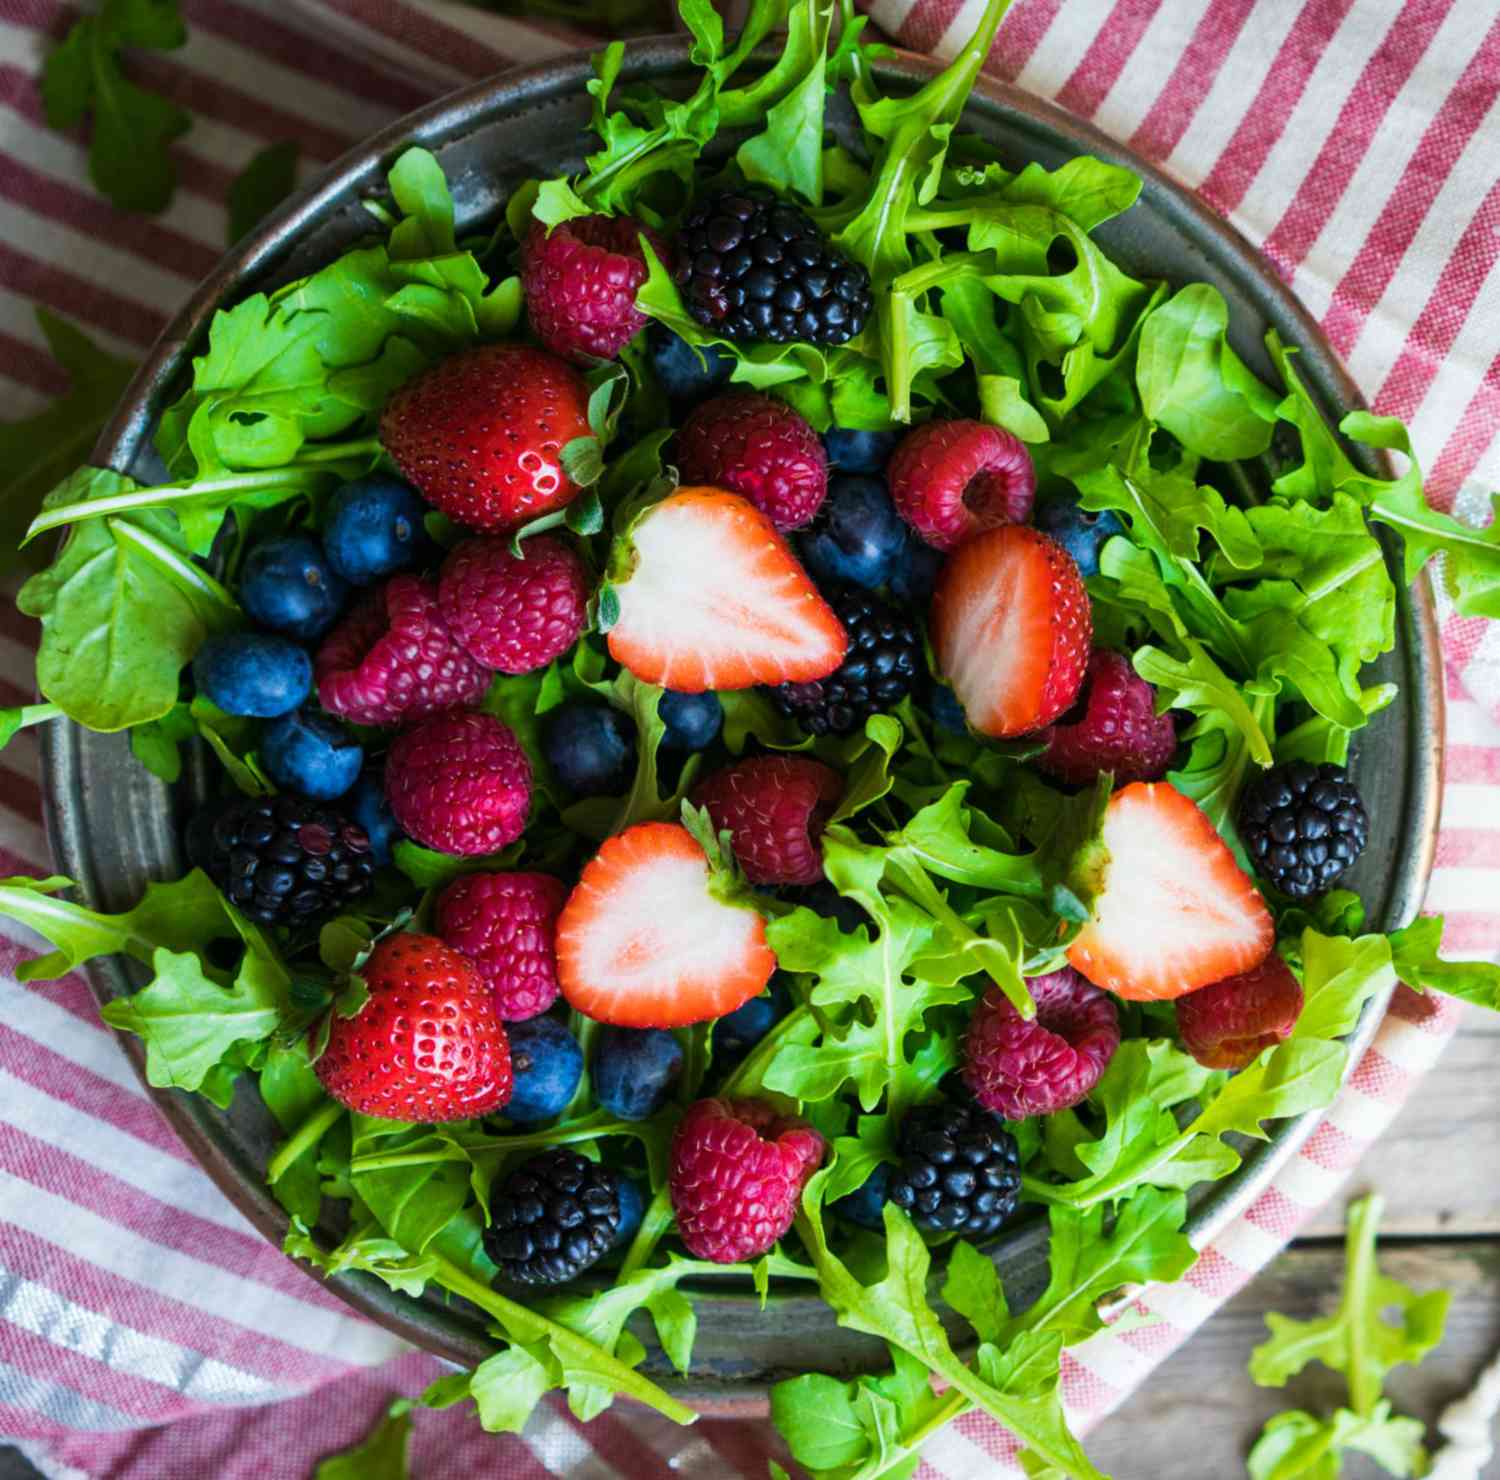 <p>If you have fresh and frozen berries on hand, you're already well on your way to making this salad. The real winner in this easy-to-make dish is the homemade vinaigrette made with blueberries, raspberries, balsamic vinegar, honey, and lemon juice.</p>
                          